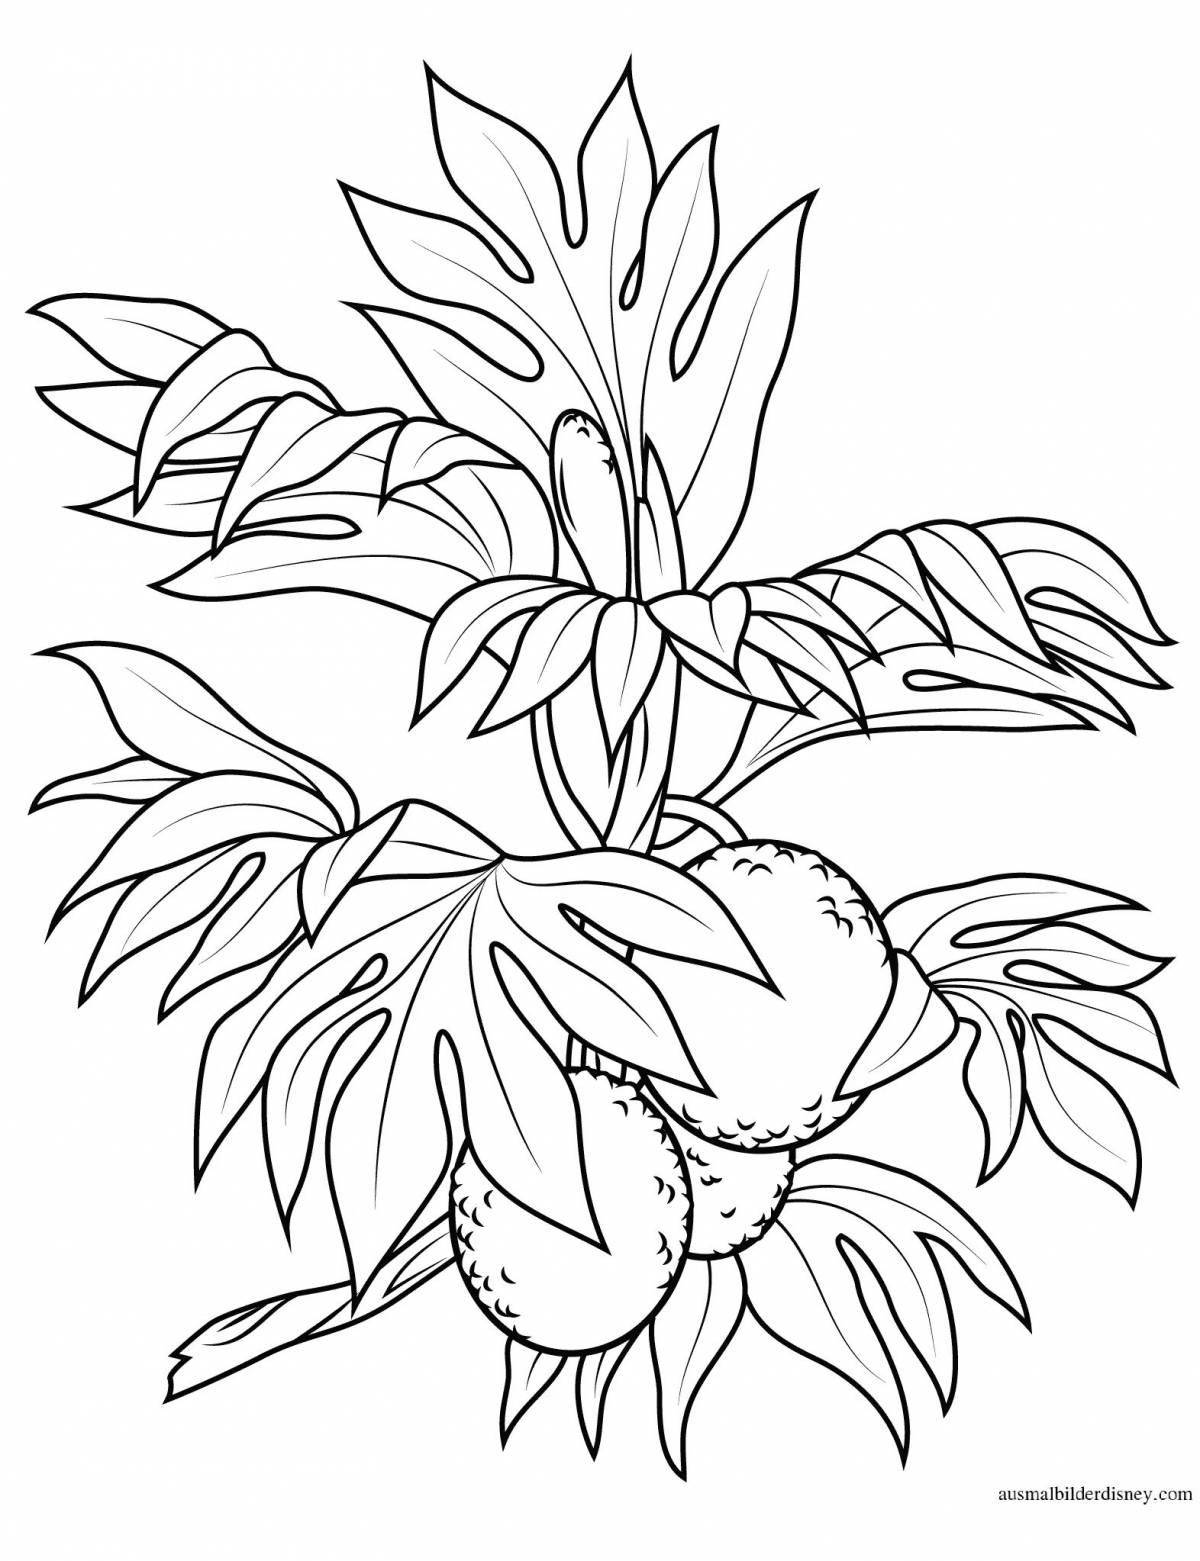 Amazing wolf and bast plant coloring page